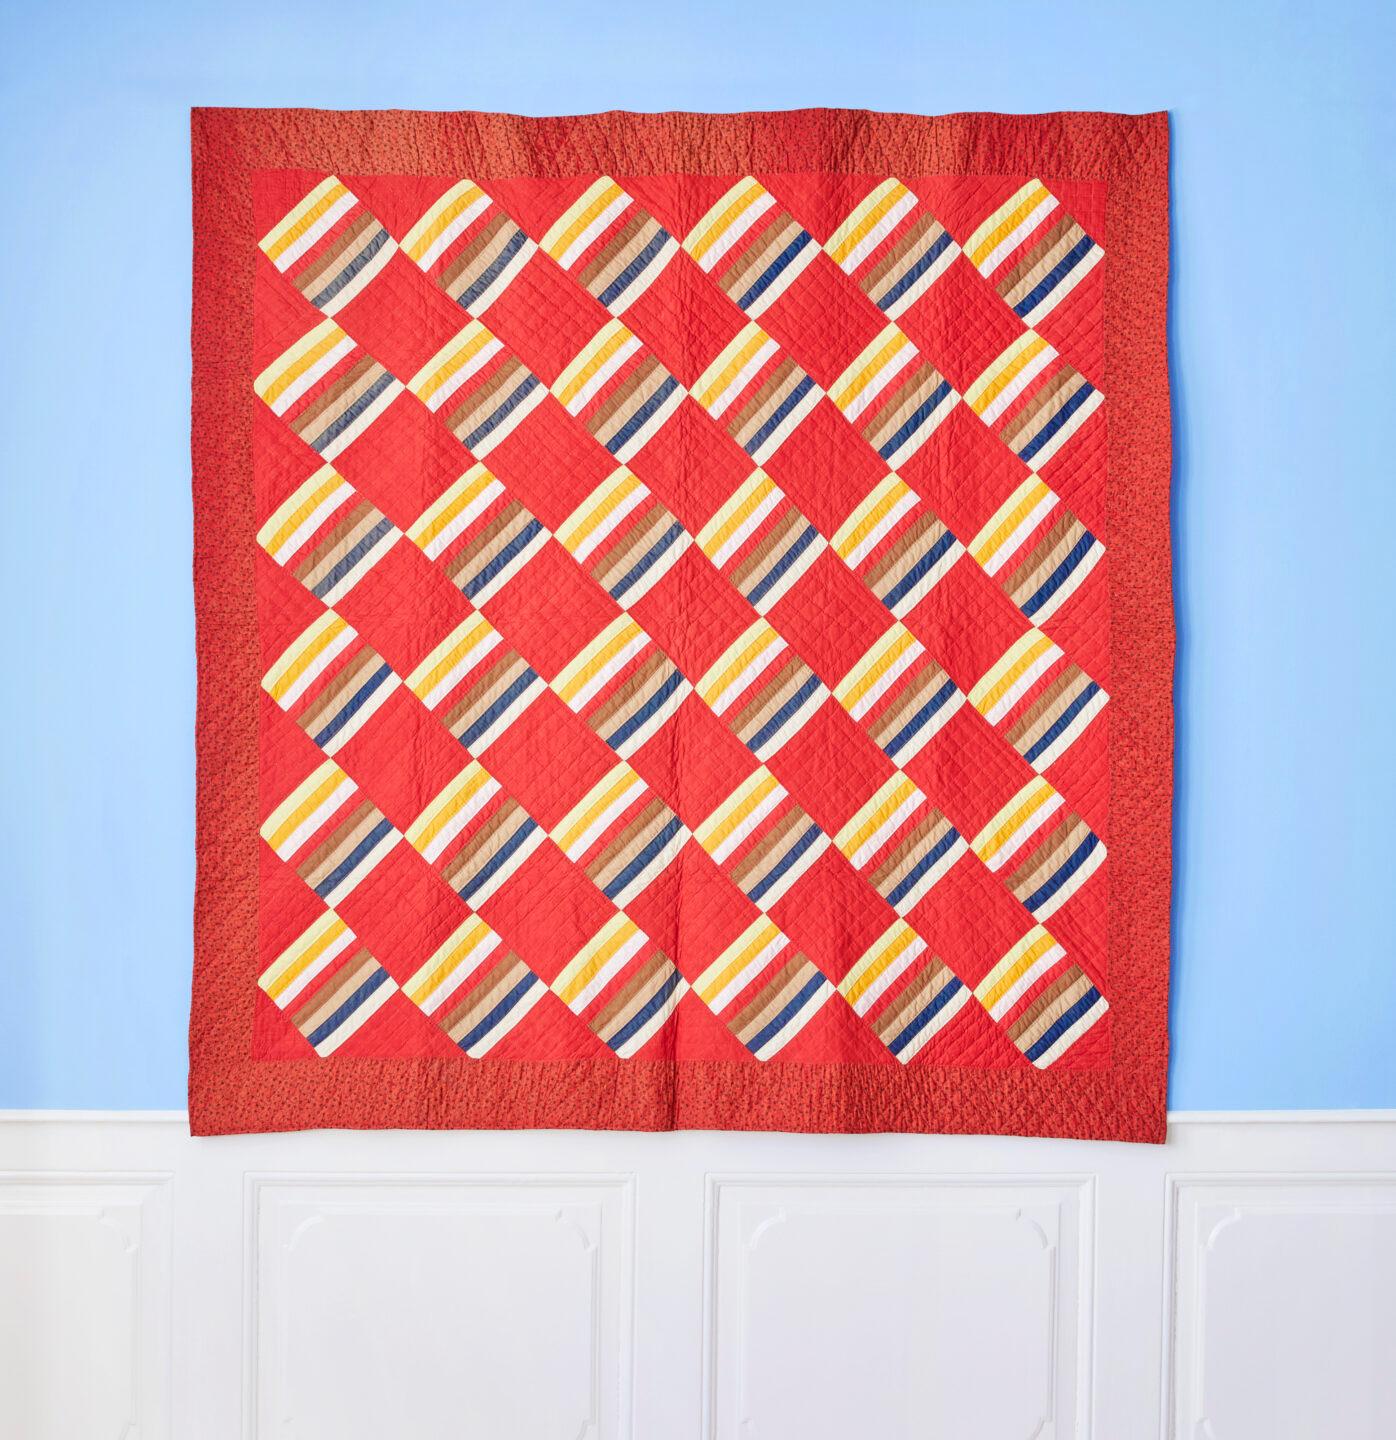 USA, 1880s

“Joseph’s Coat Variation” antique quilt - in red with a geometrical pattern. 

Measures: H 186 x W 177 cm.